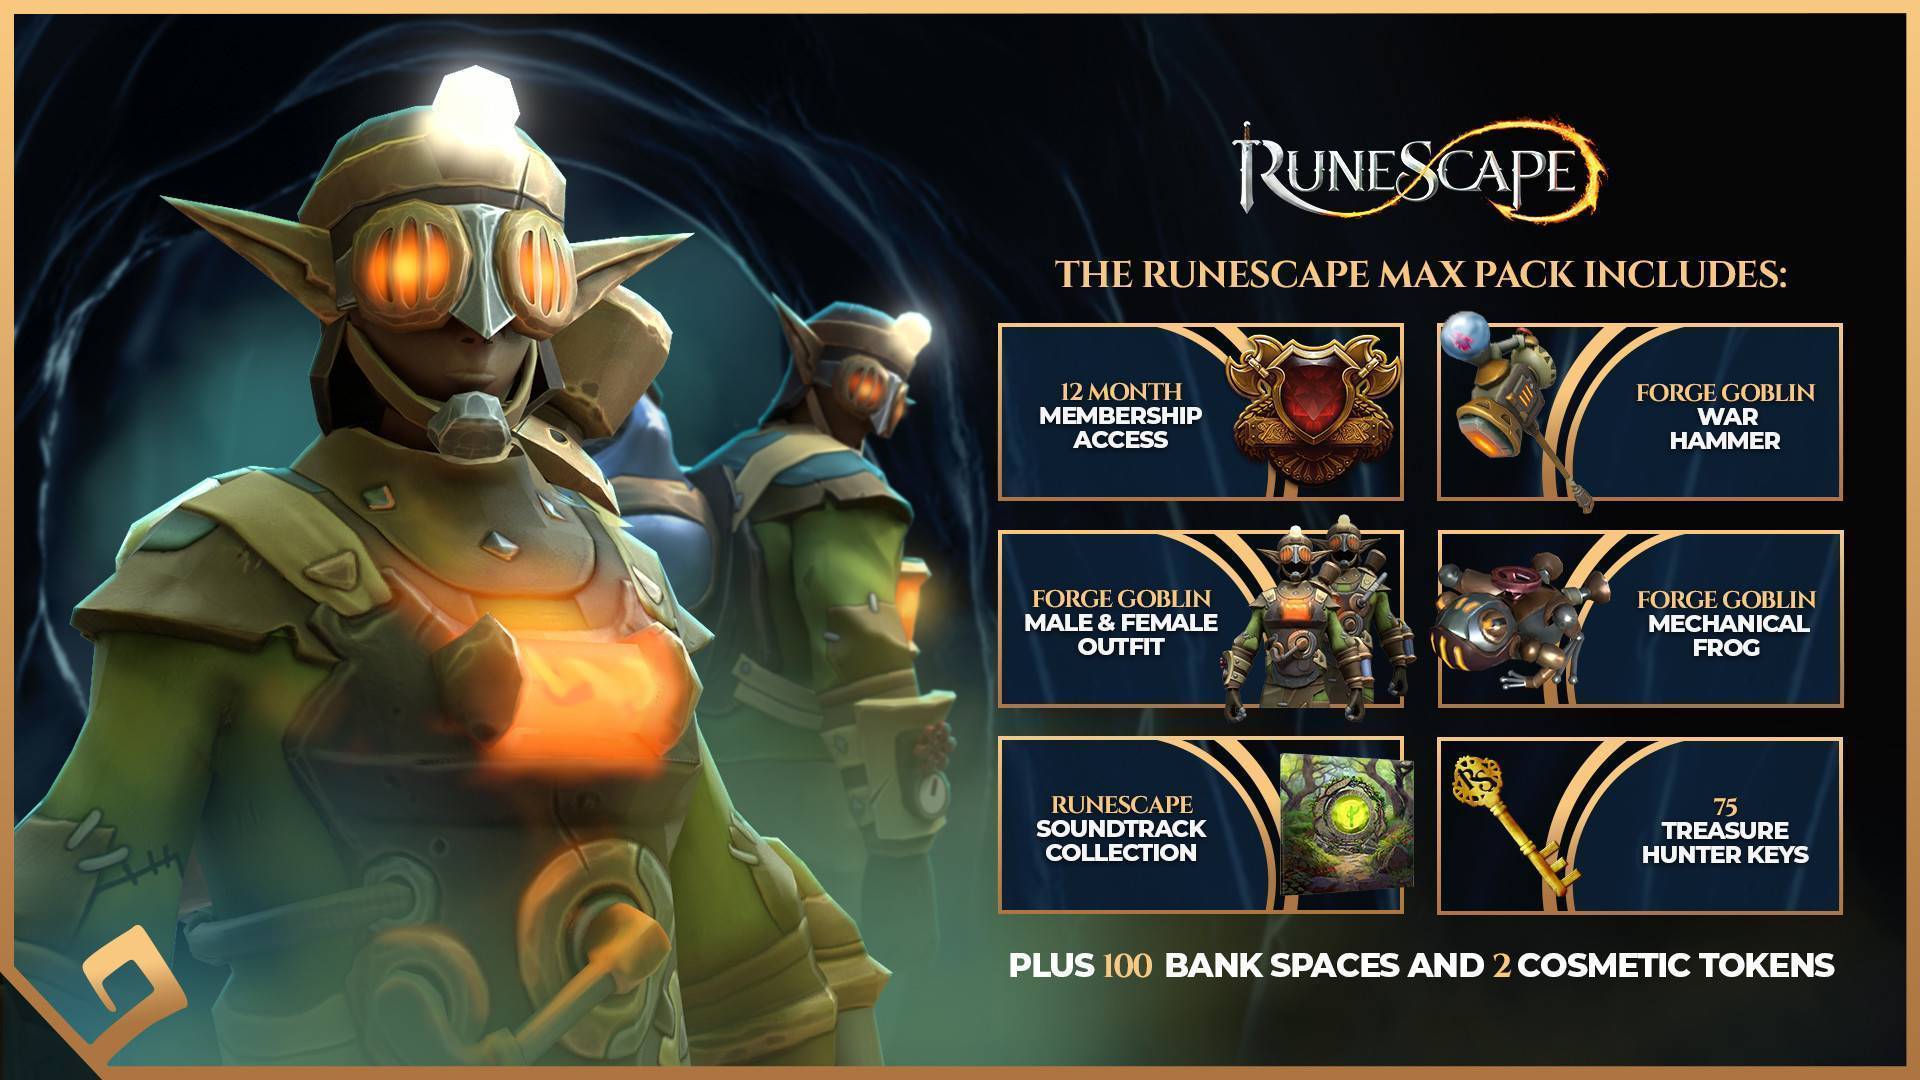 RuneScape Teatime Max Pack on Steam